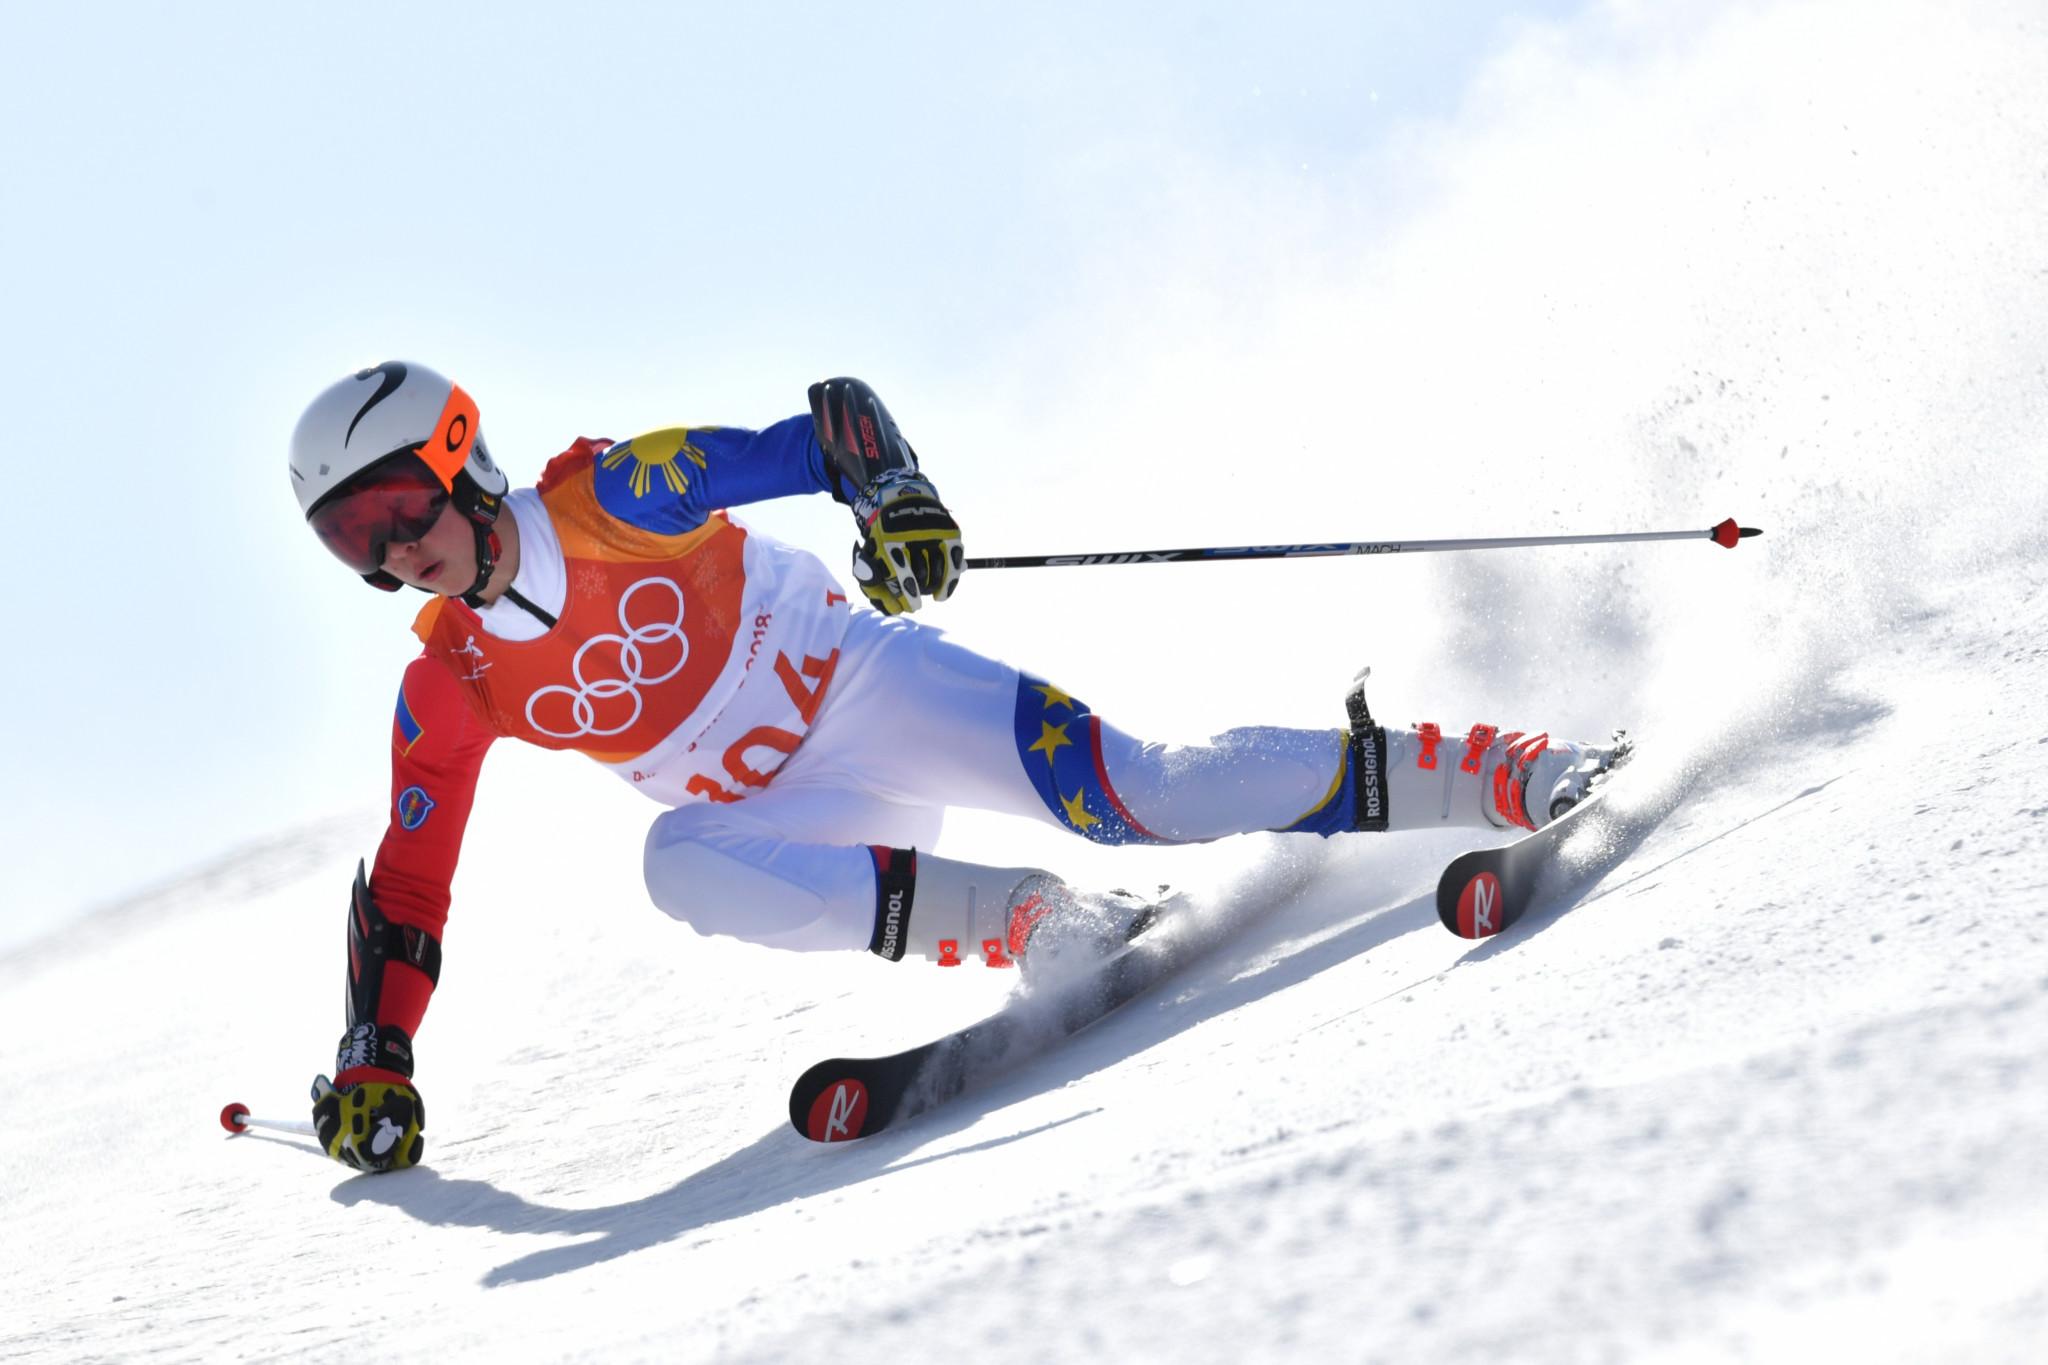 Several unlikely nations will be represented at the Beijing 2022 Winter Olympics in Alpine skiing, including the Philippines through Asa Miller ©Getty Images